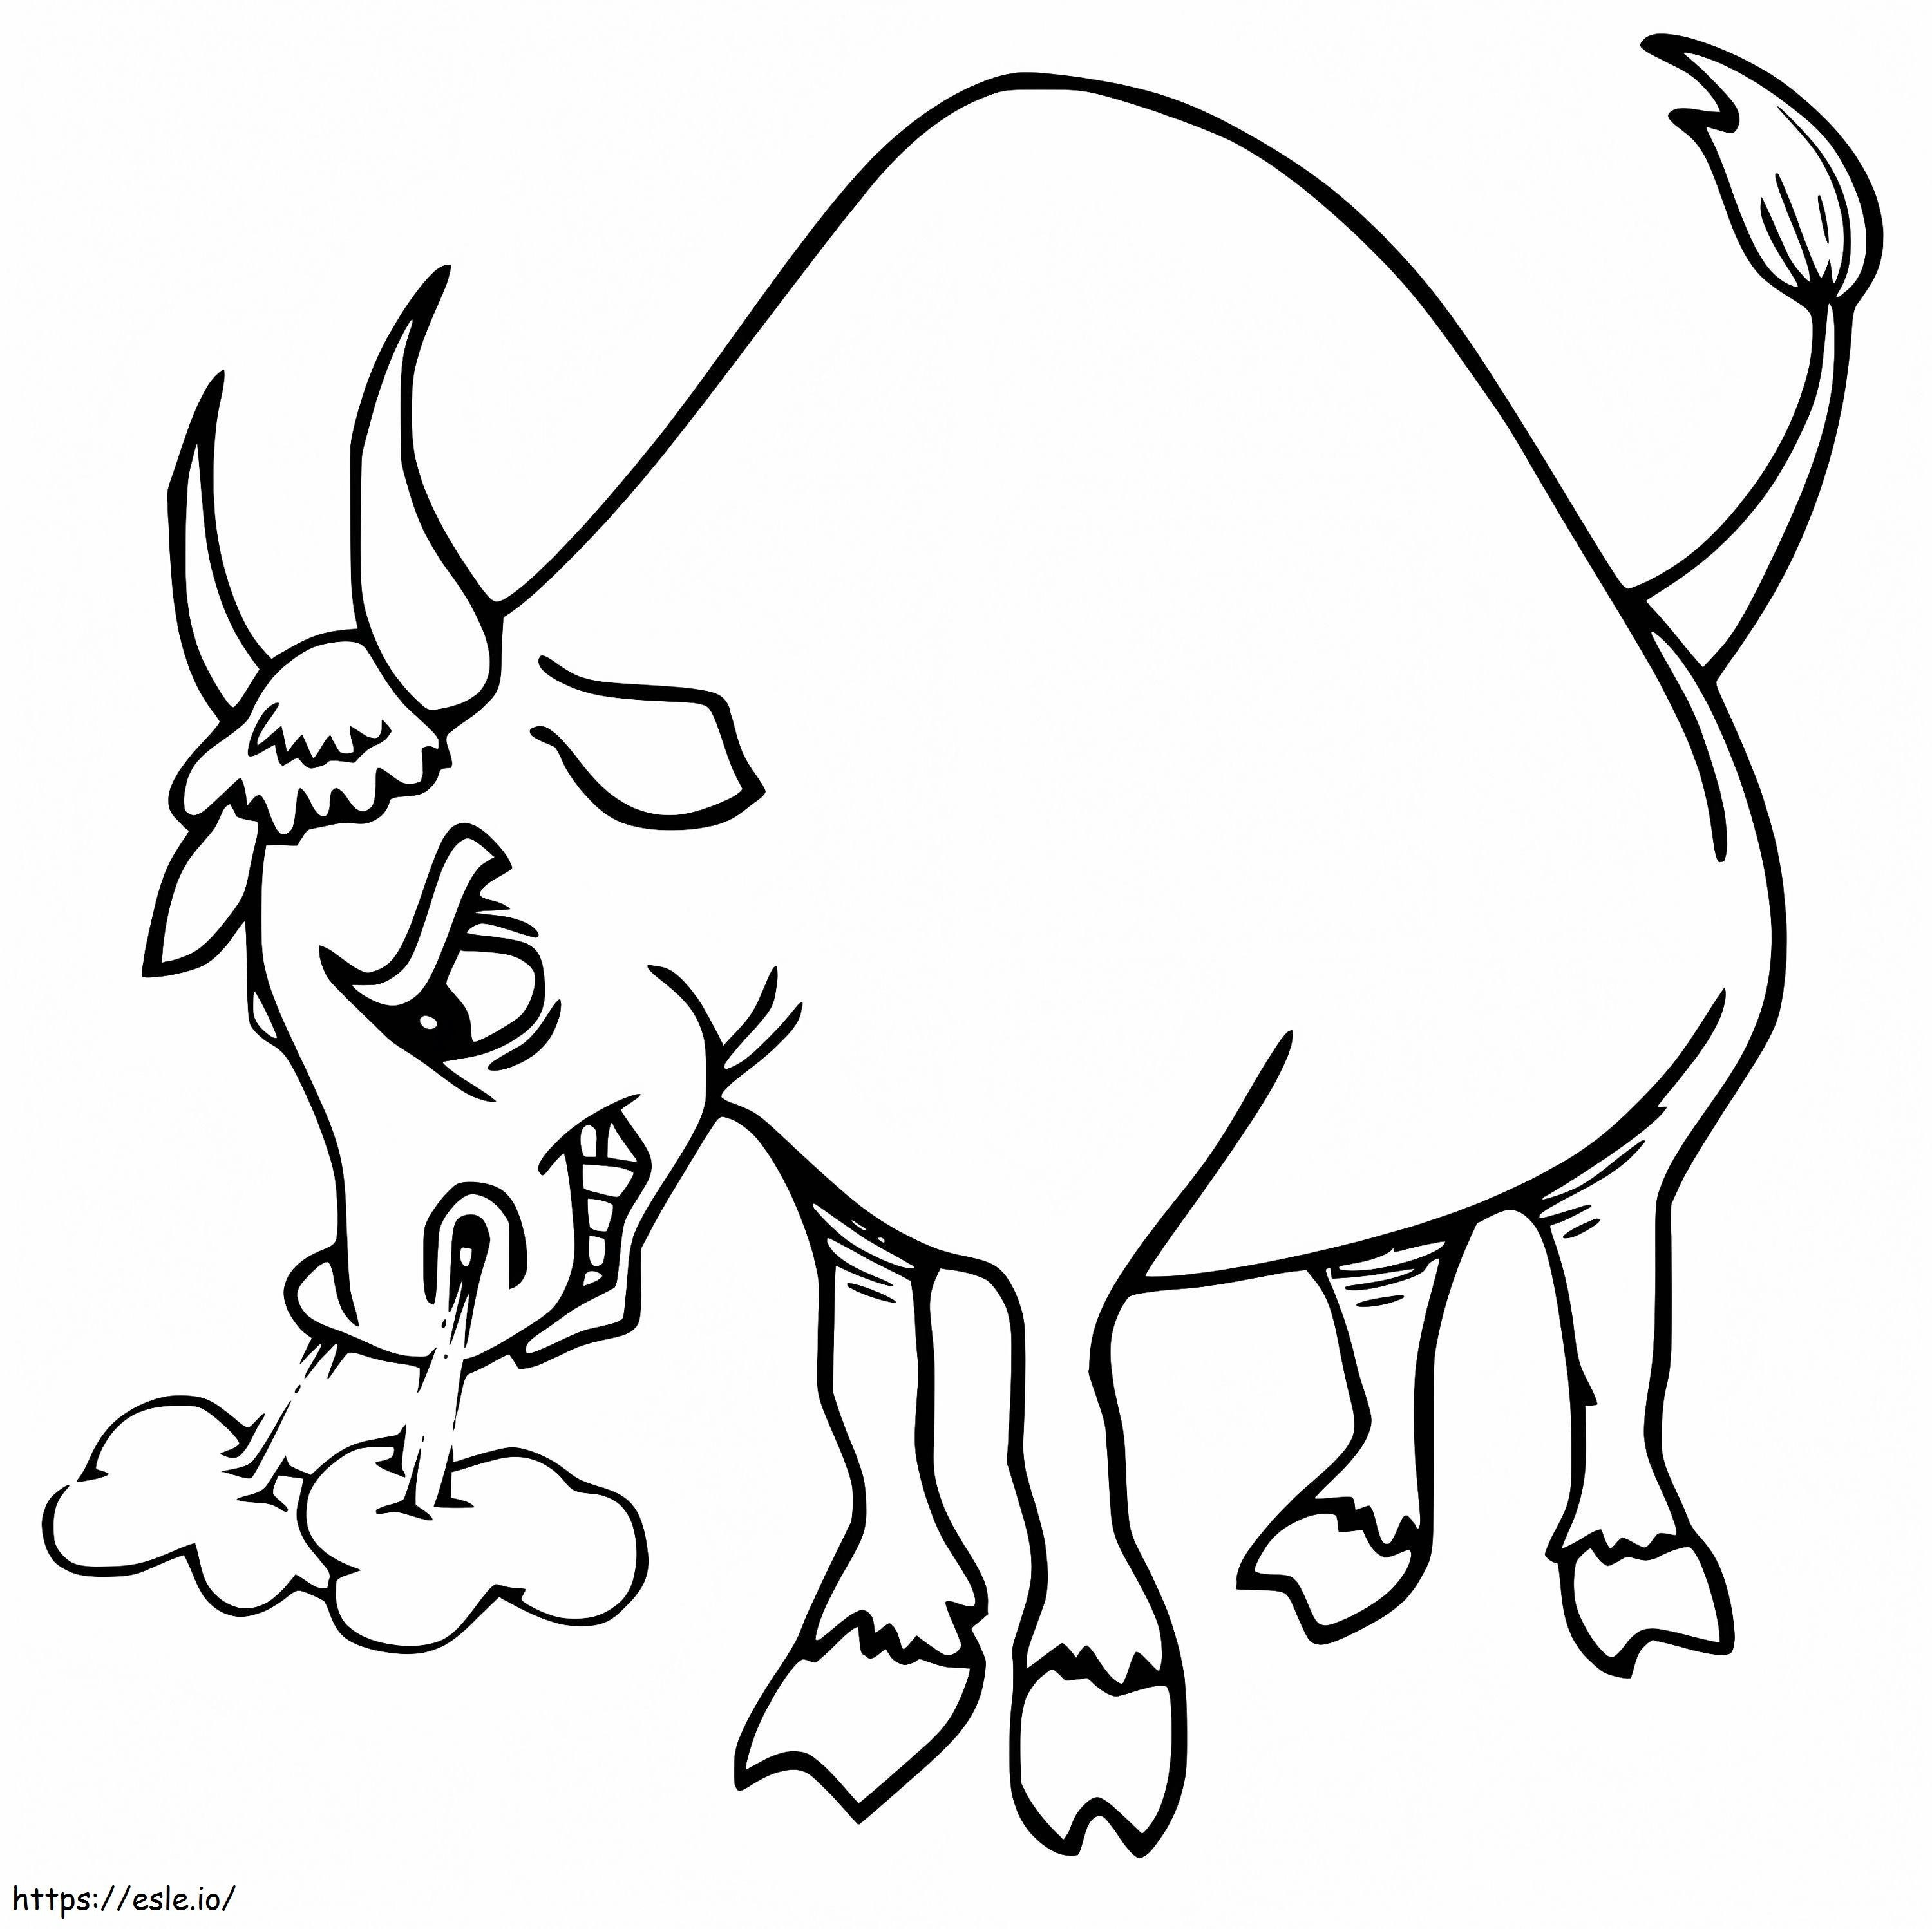 Bull 8 coloring page